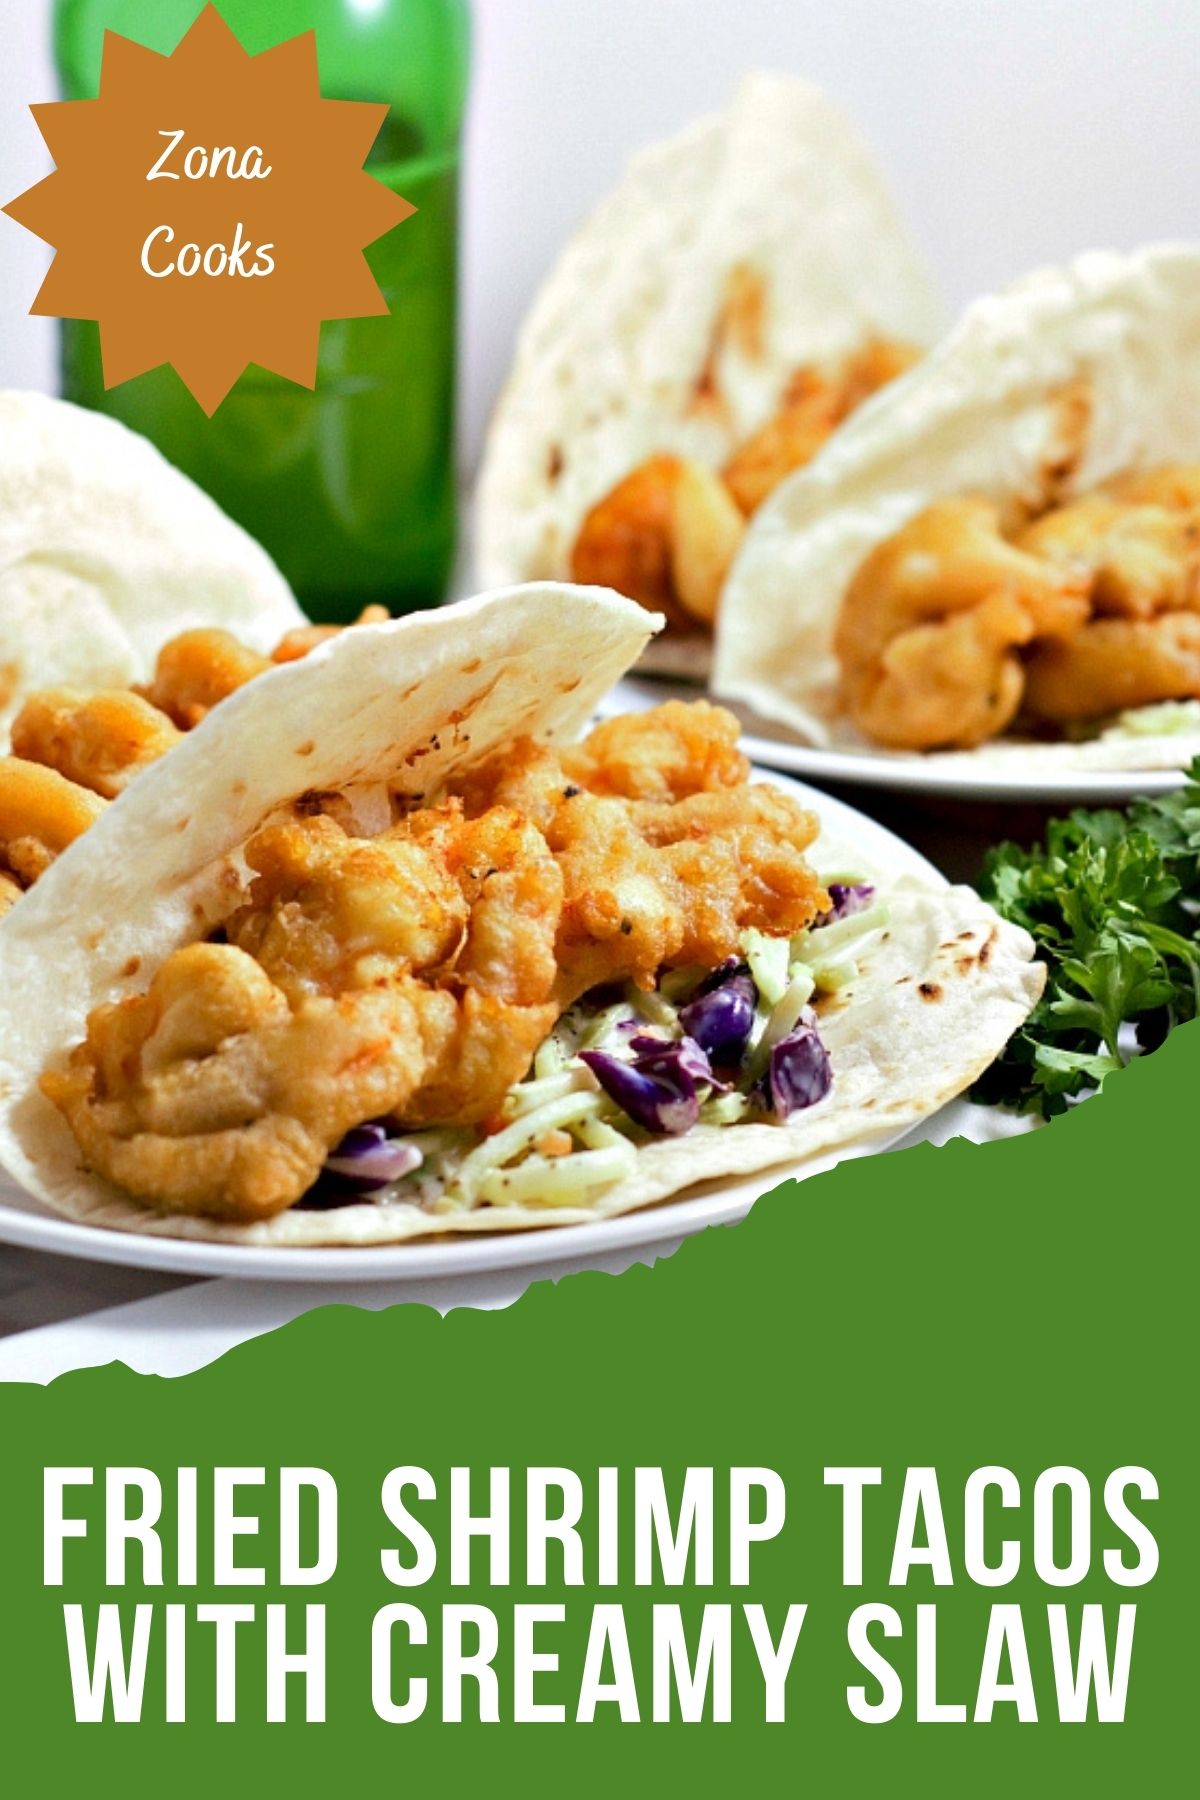 15 Minute Beer Battered Shrimp Tacos with Creamy Coleslaw • Zona Cooks